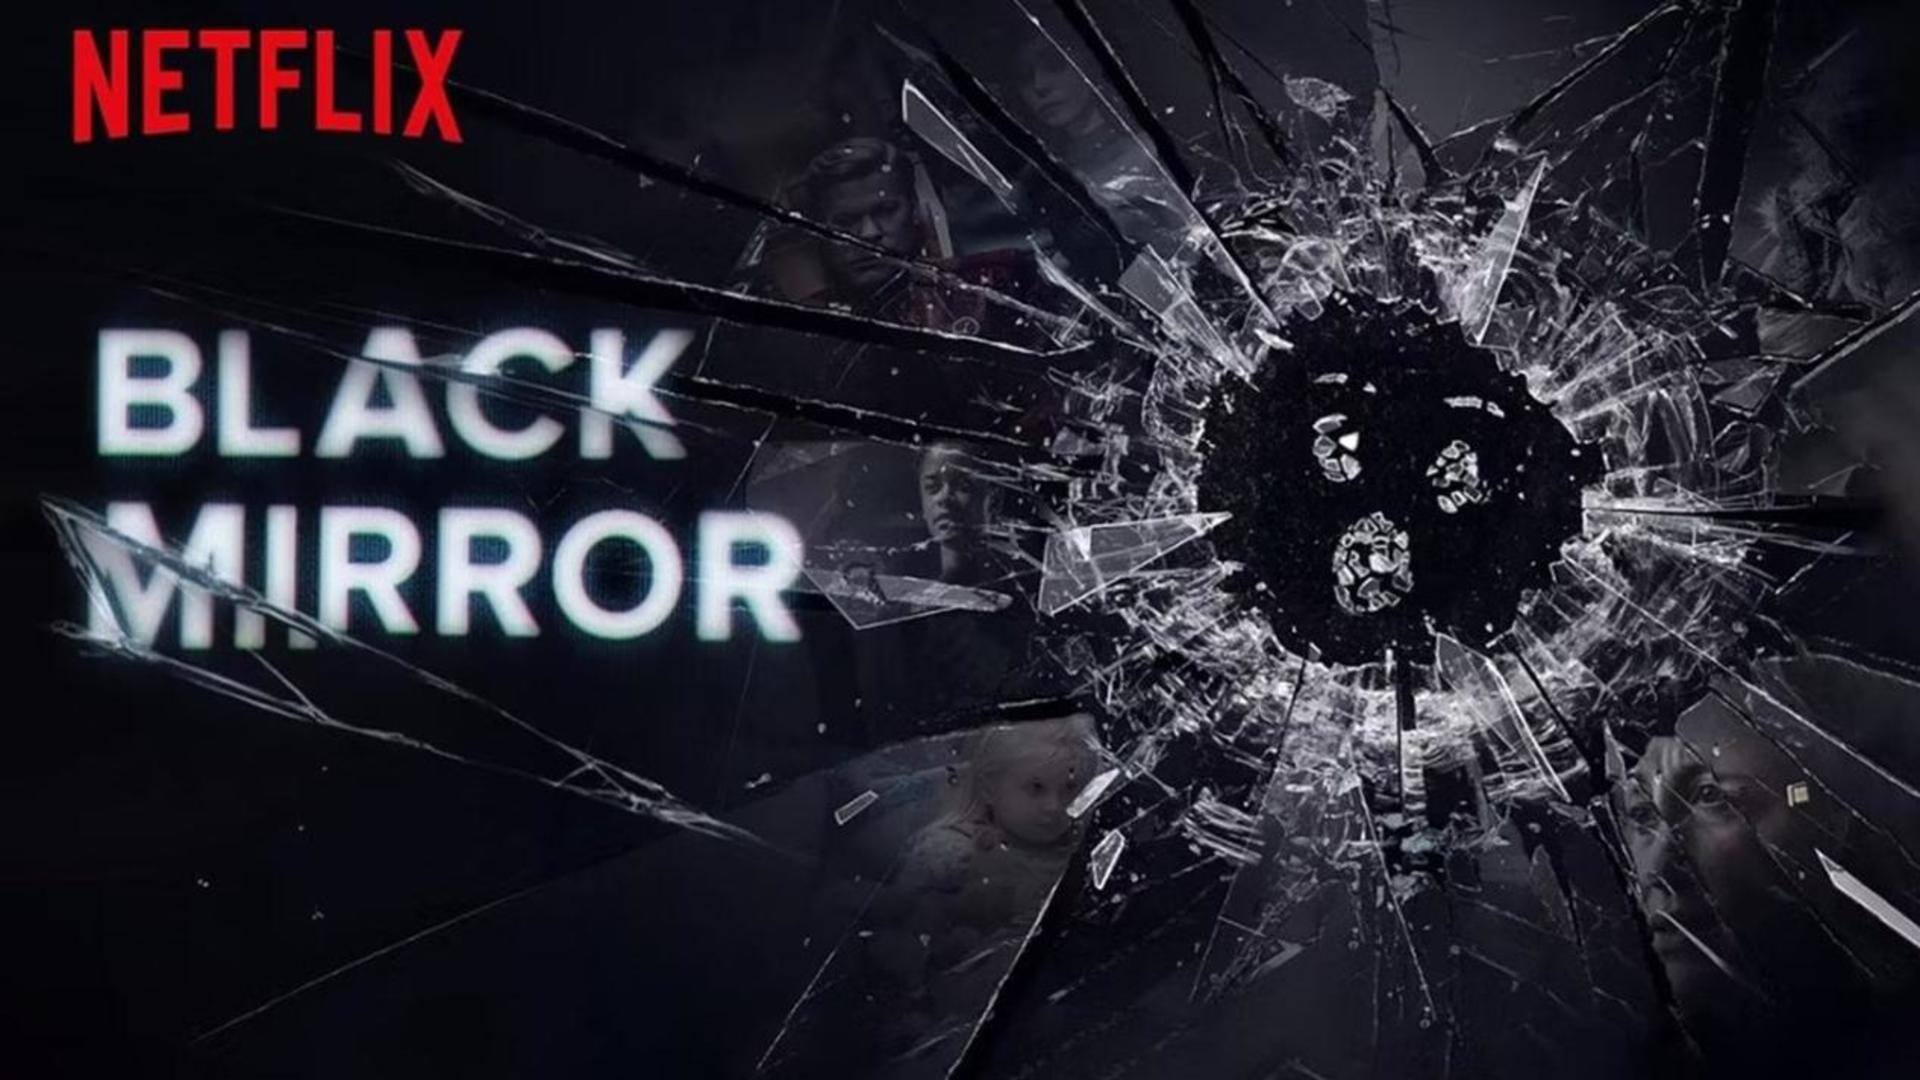 'Black Mirror' creator tried ChatGPT; the result was 'shit'